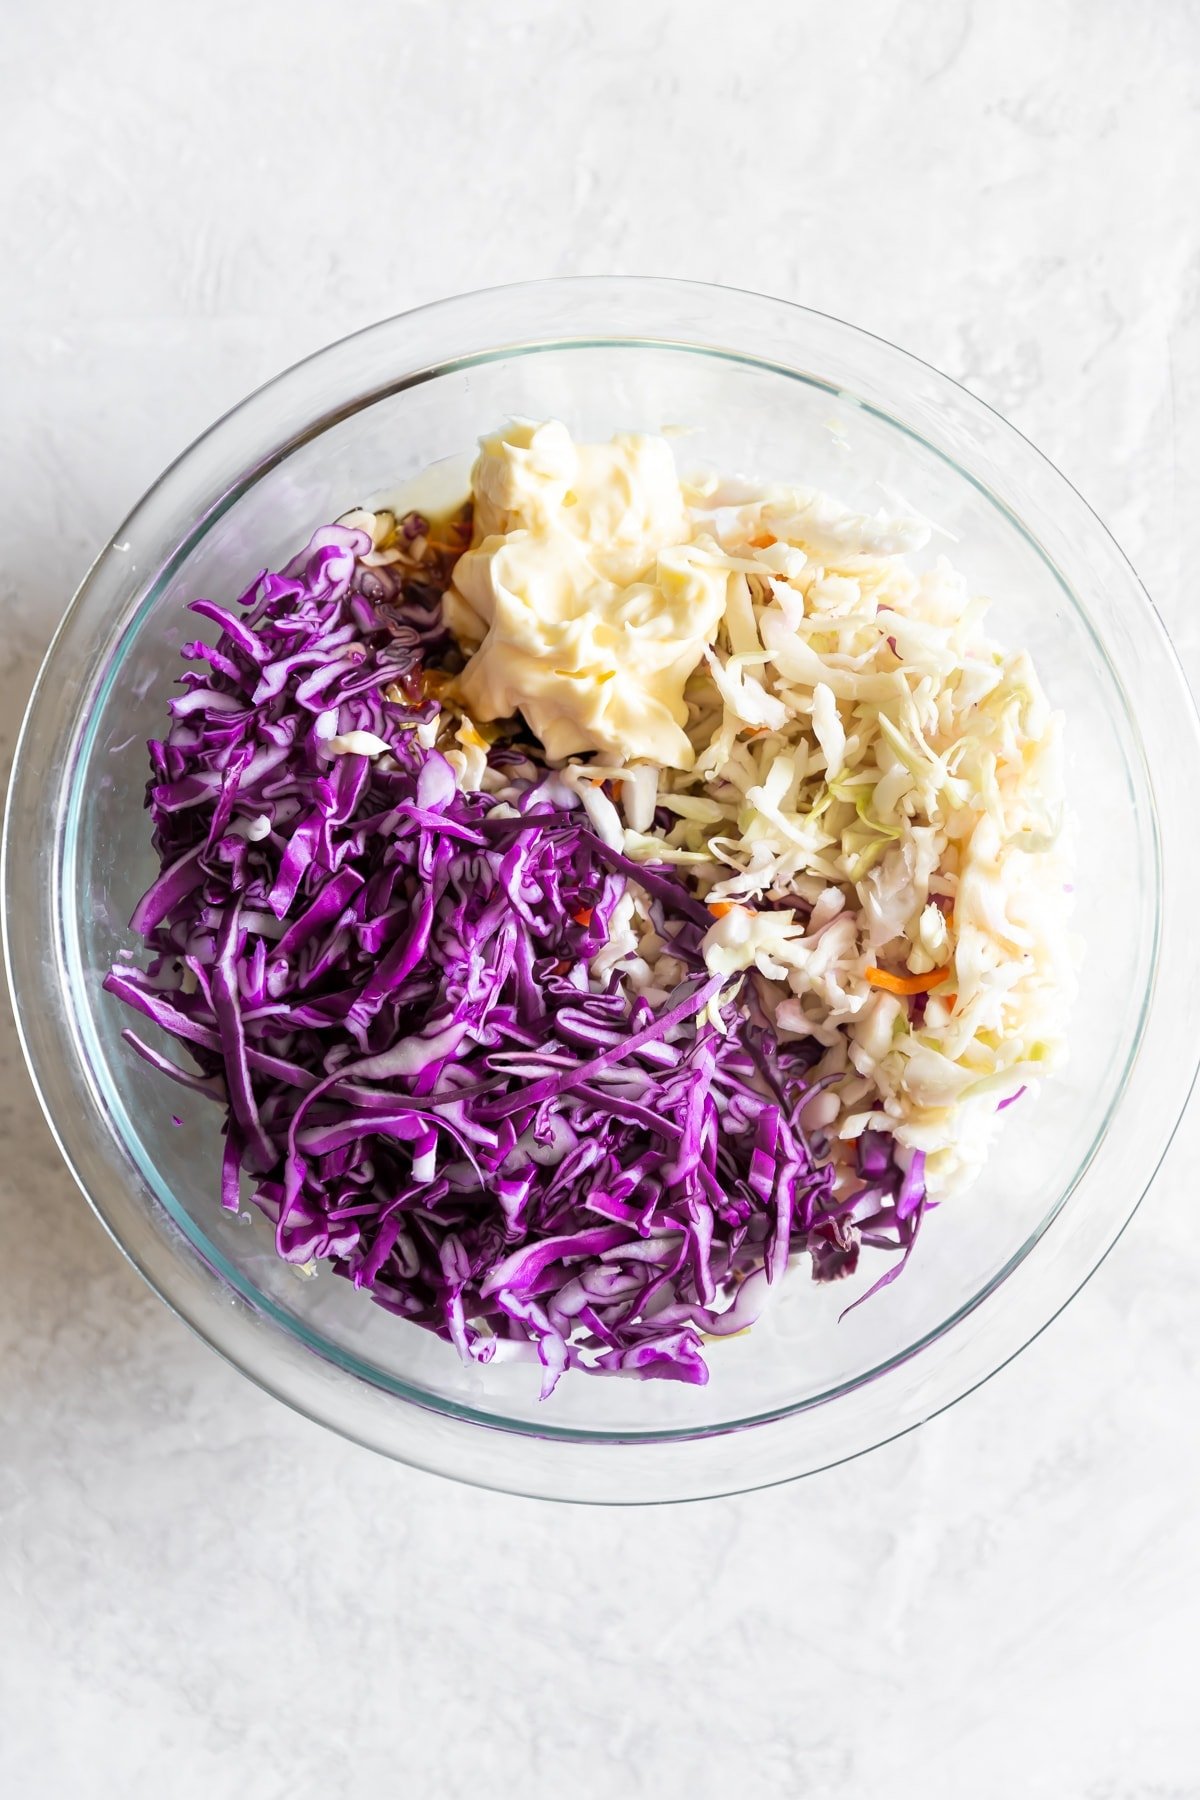 slaw with shredded red cabbage, mayo, honey, red wine vinegar, and coleslaw in a bowl before mixing